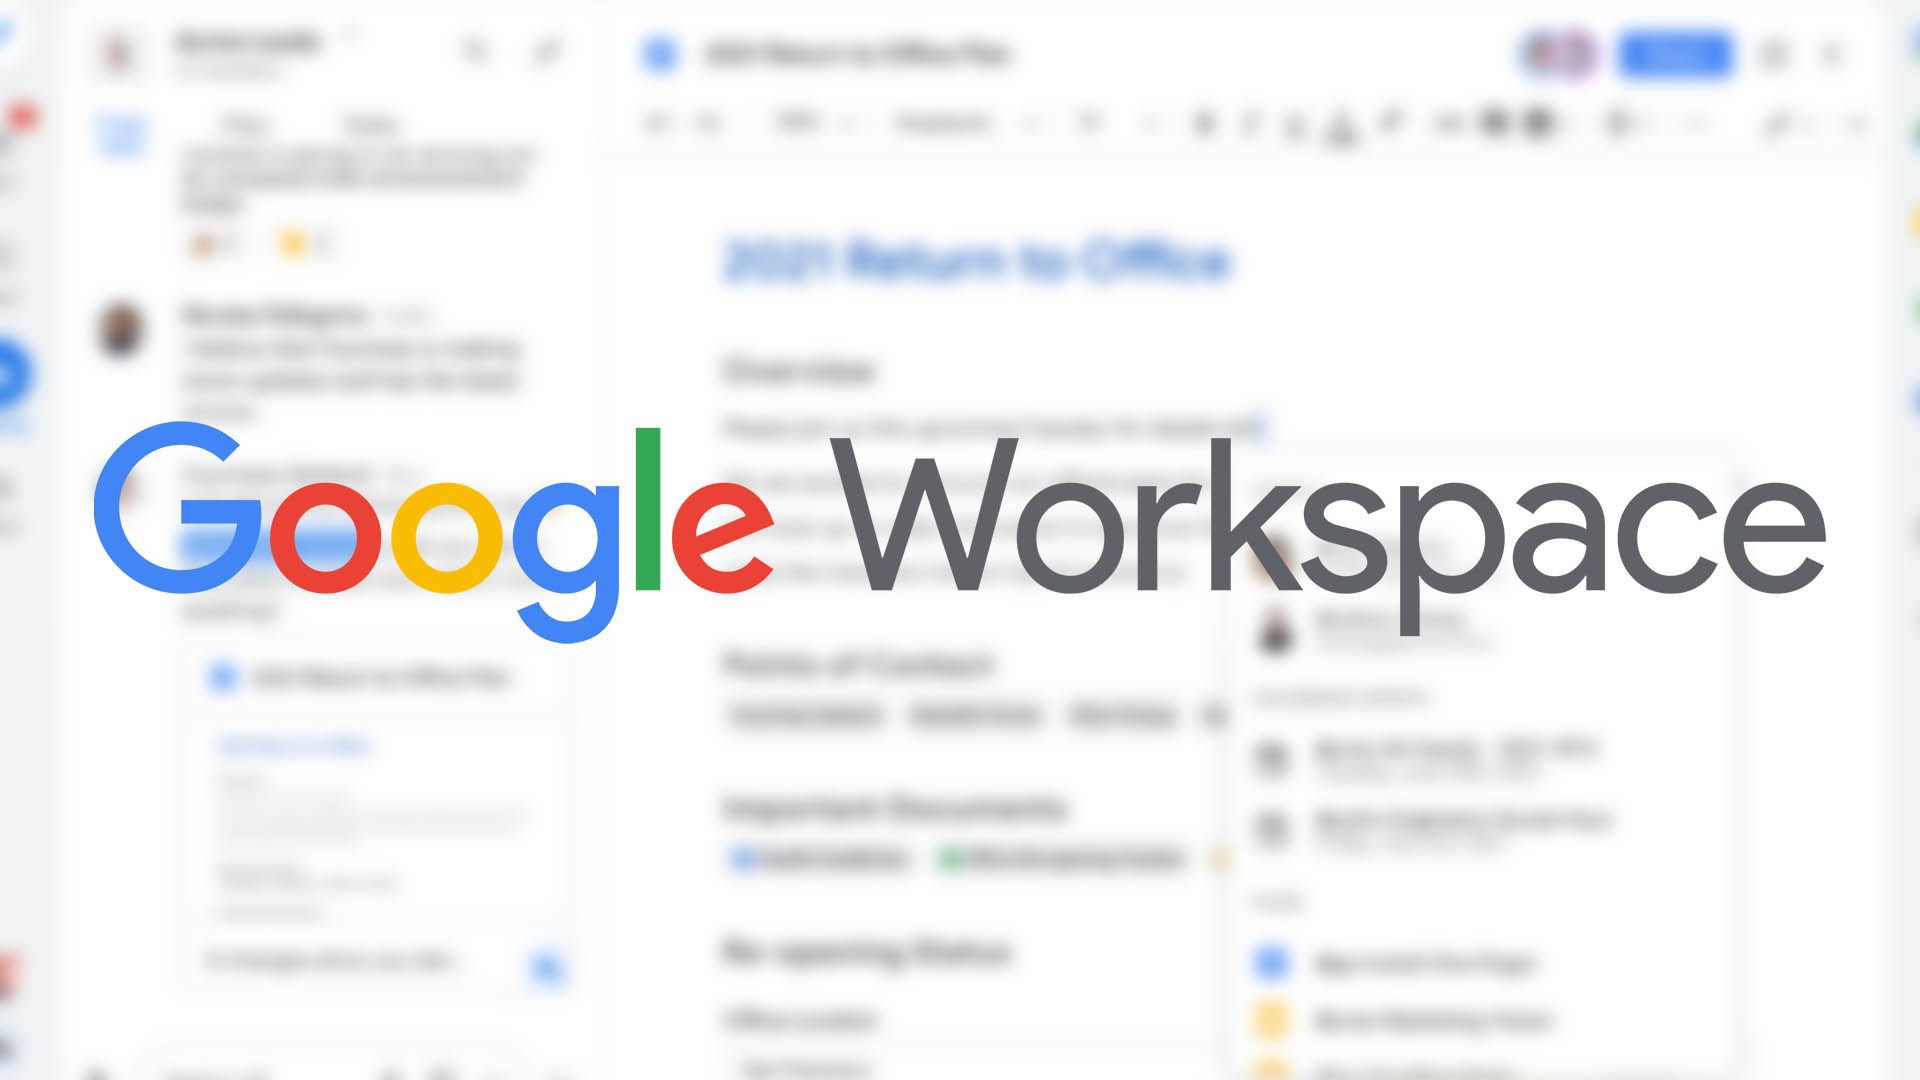 The Google Workspace logo on top of a blurred Google Gmail page